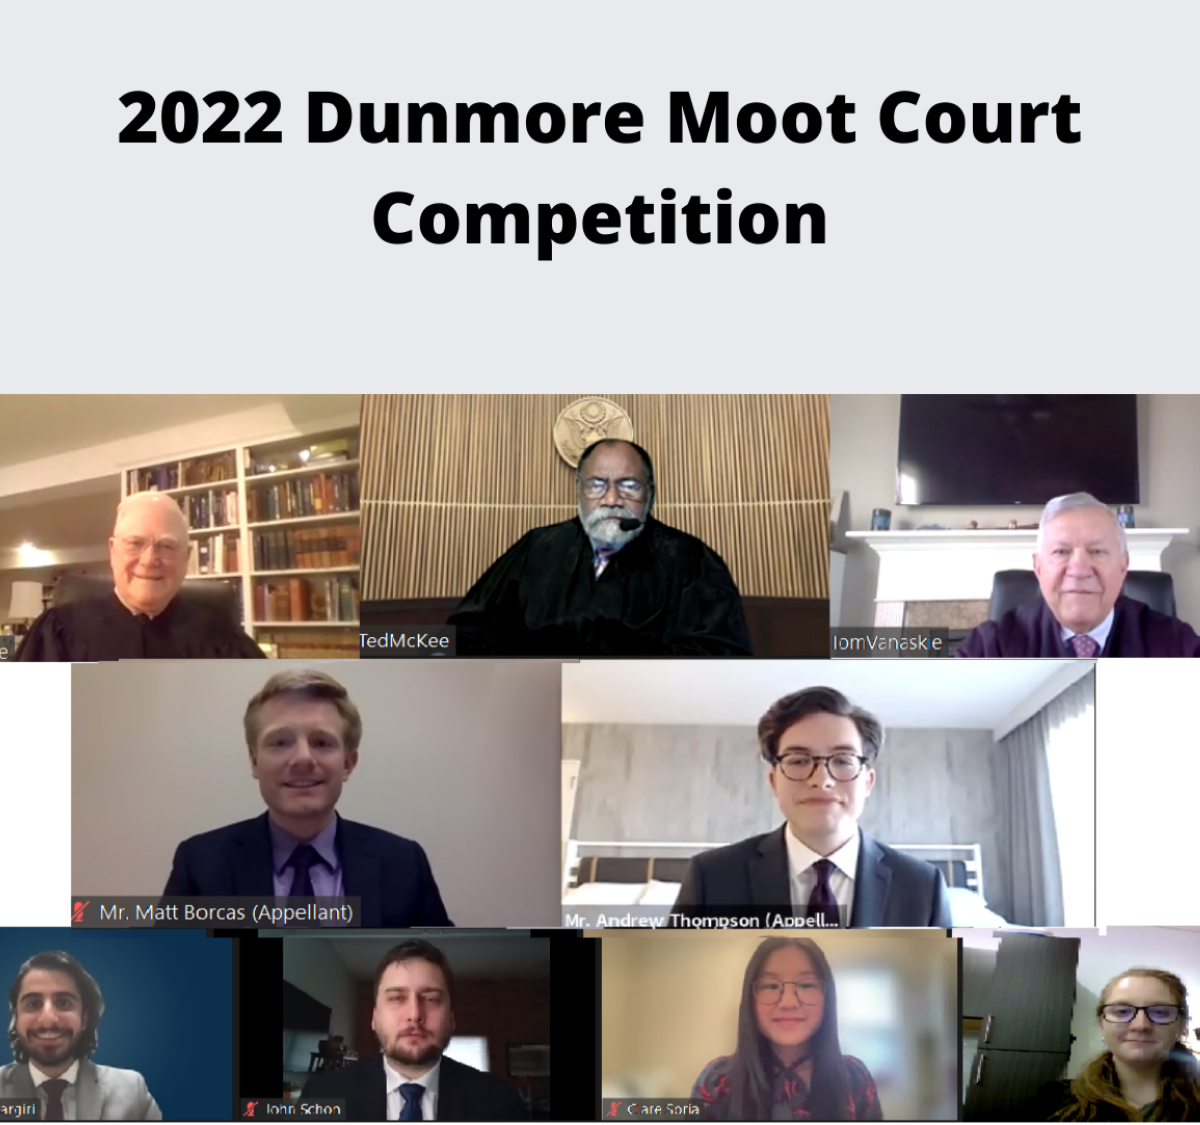 Dunmore Moot Court Competition 2022